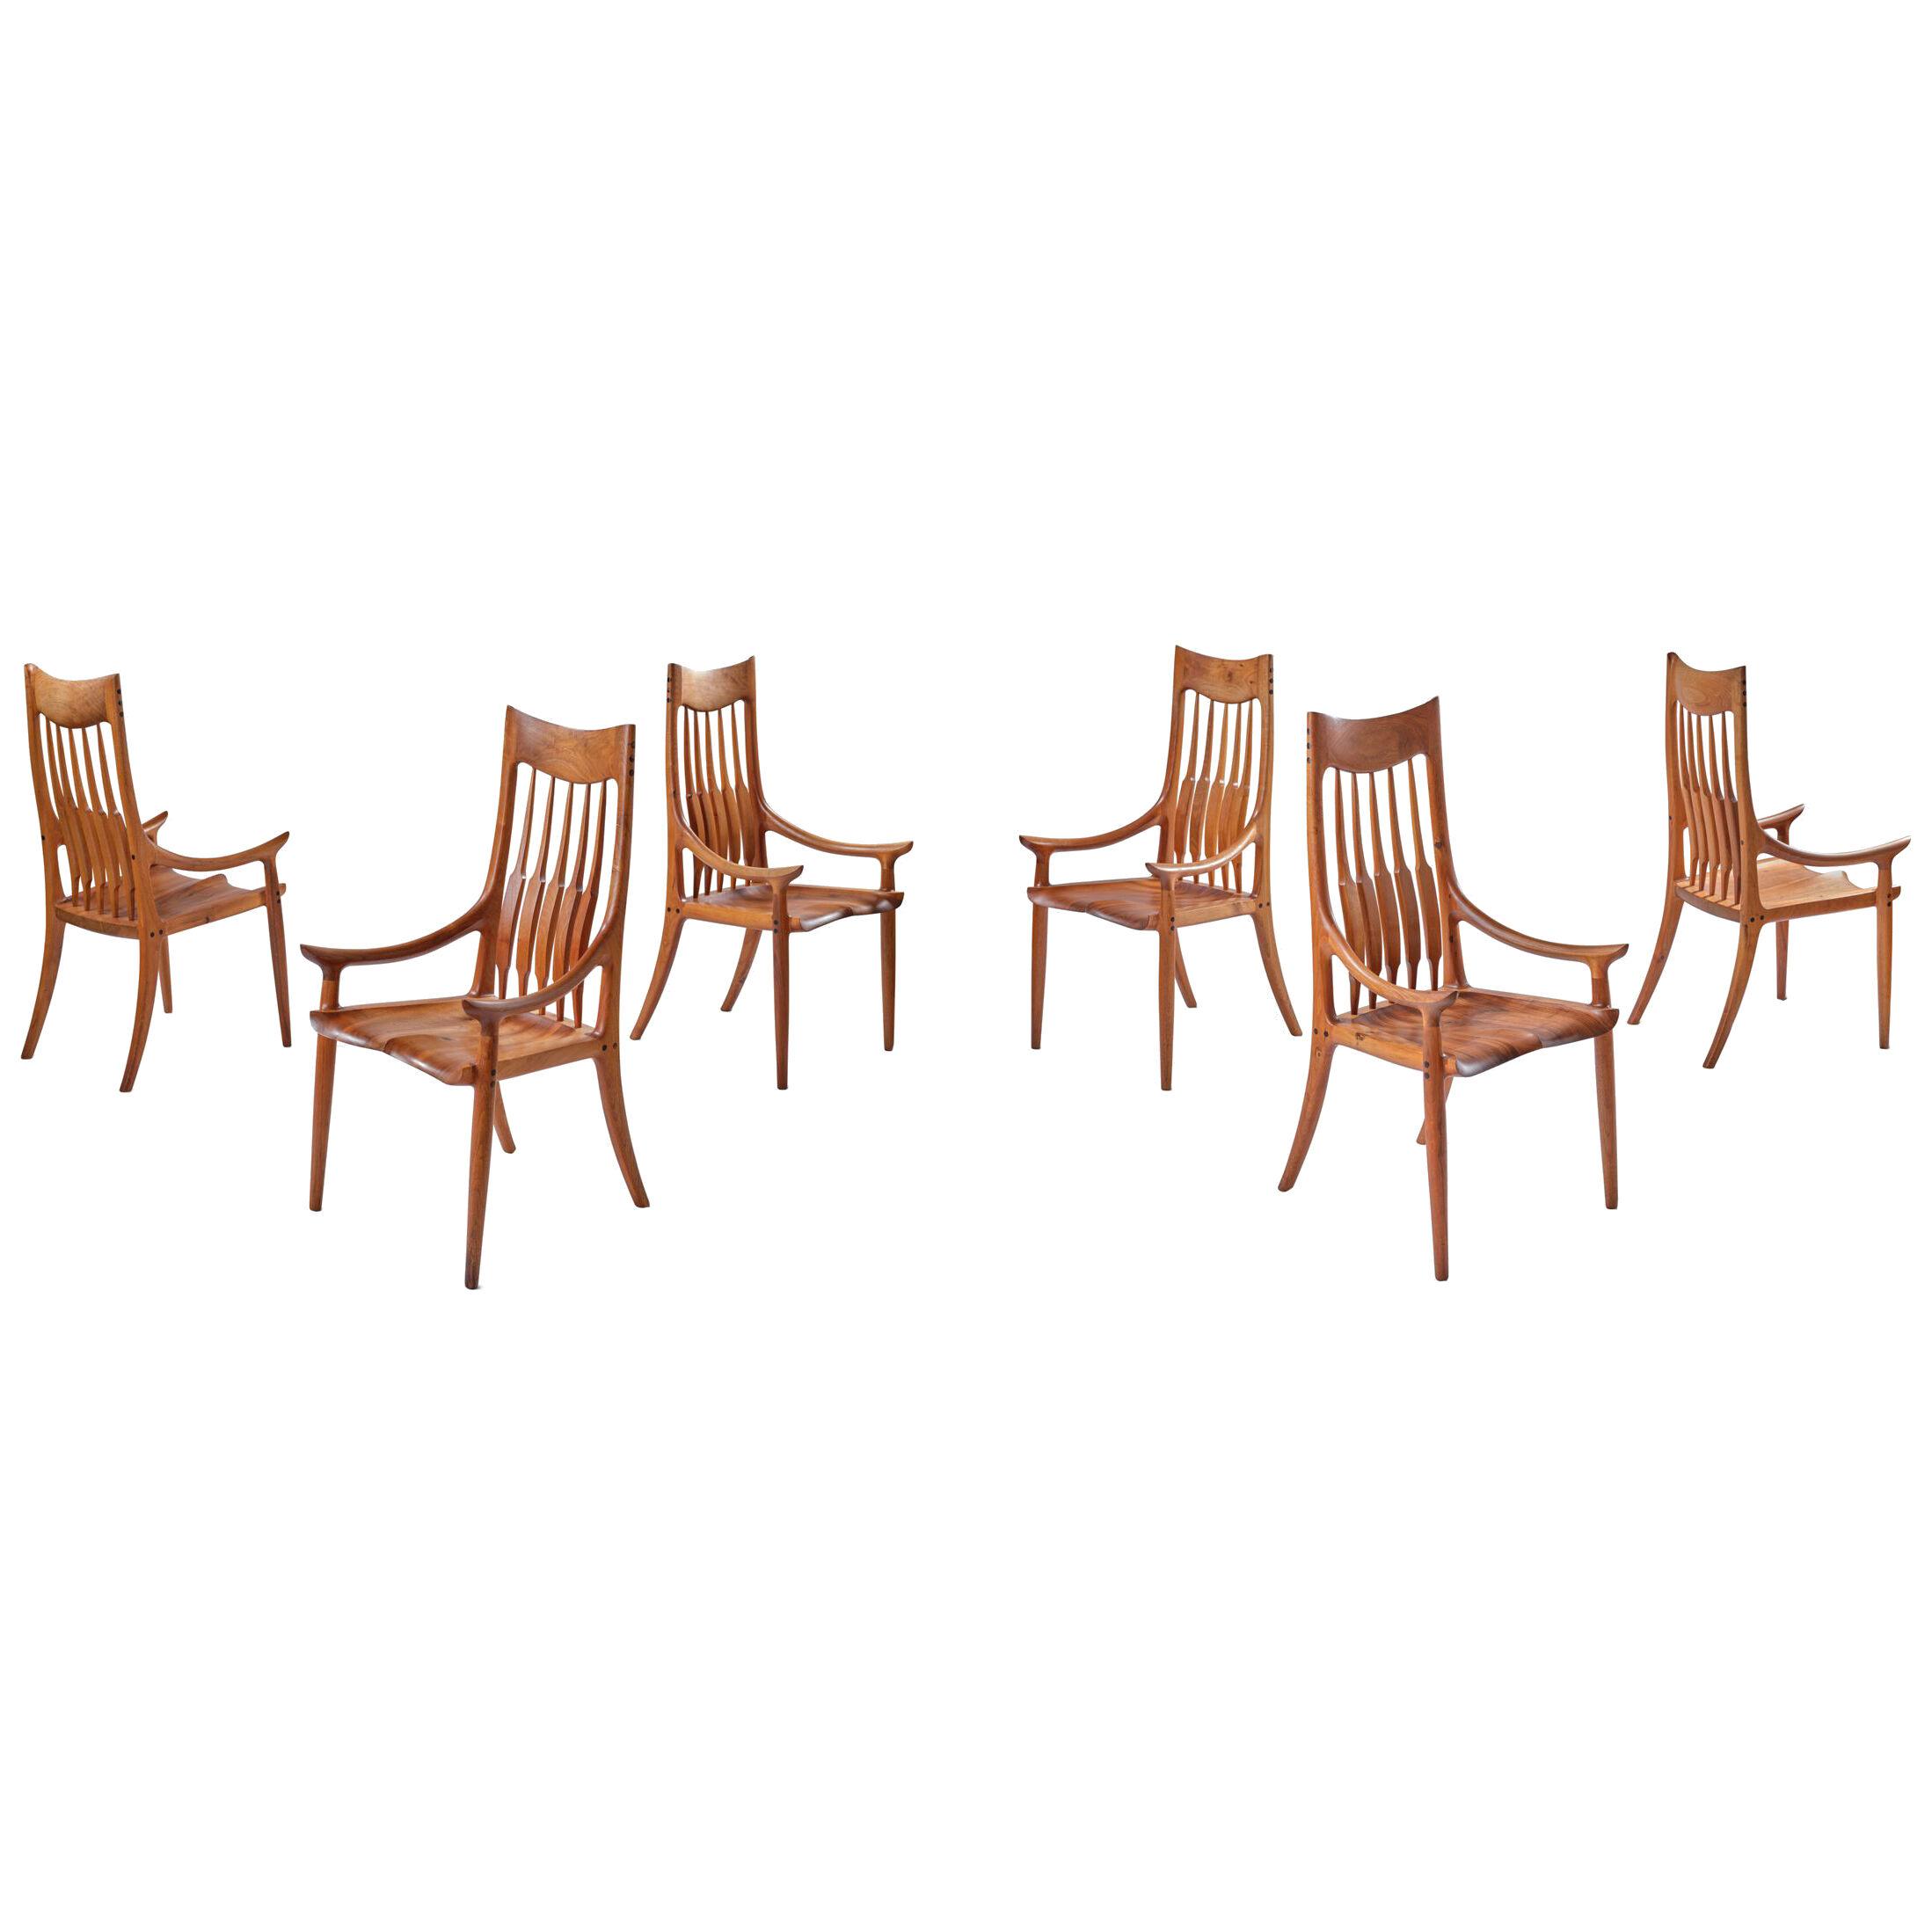 Set of 6 High Back Dining Chairs by Sam Maloof, 1983